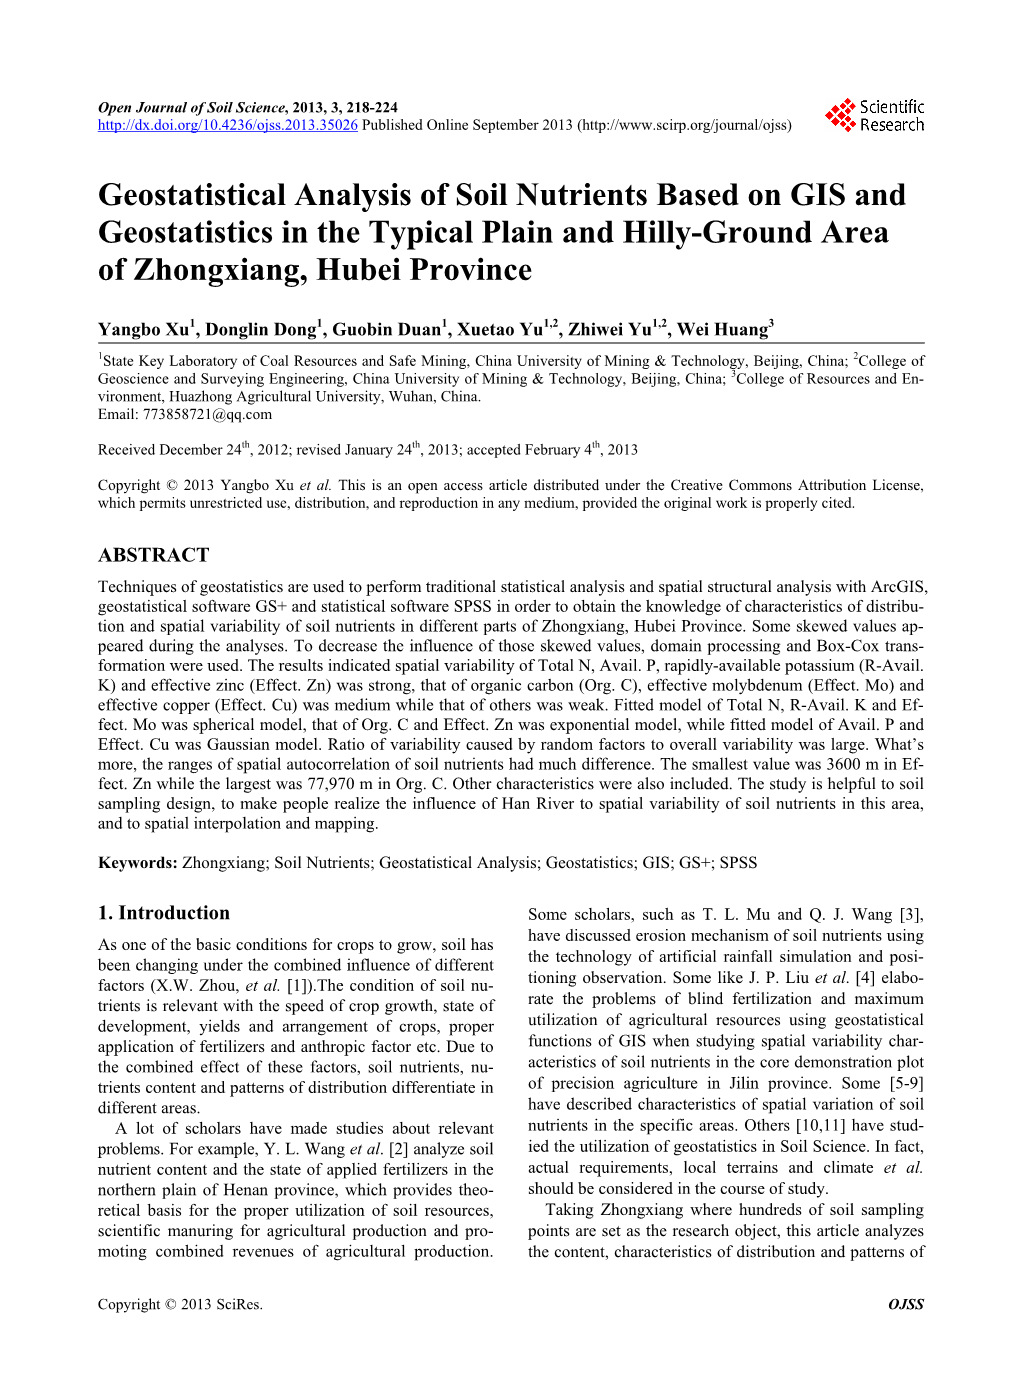 Geostatistical Analysis of Soil Nutrients Based on GIS and Geostatistics in the Typical Plain and Hilly-Ground Area of Zhongxiang, Hubei Province